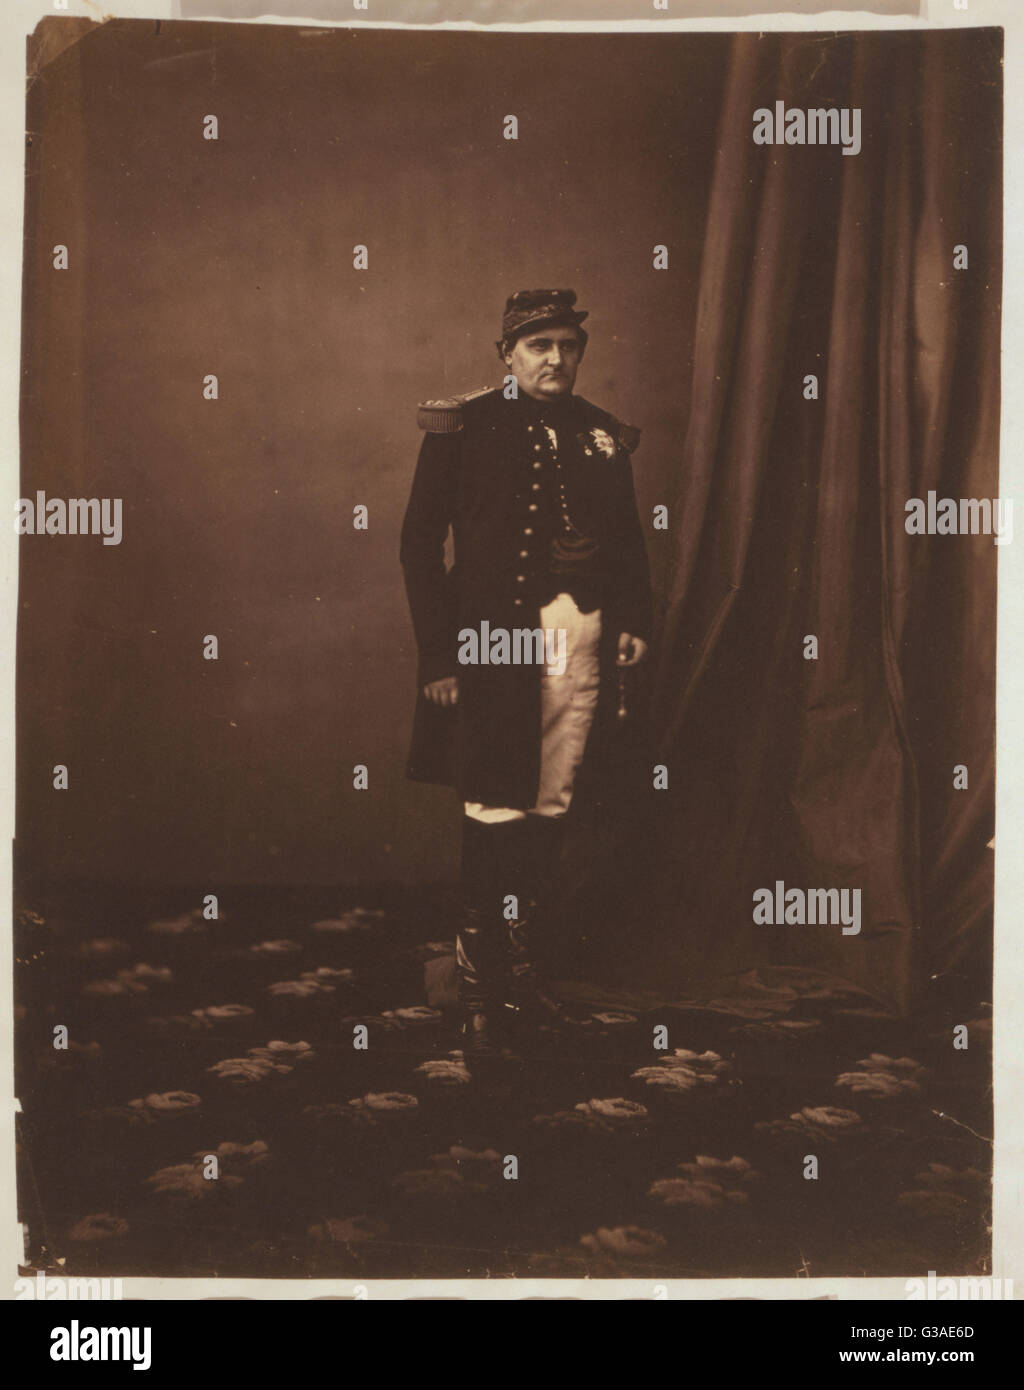 His Royal Highness Prince Napoleon. Prince Napoleon, in uniform, full-length portrait, facing front. Date 1855. Stock Photo